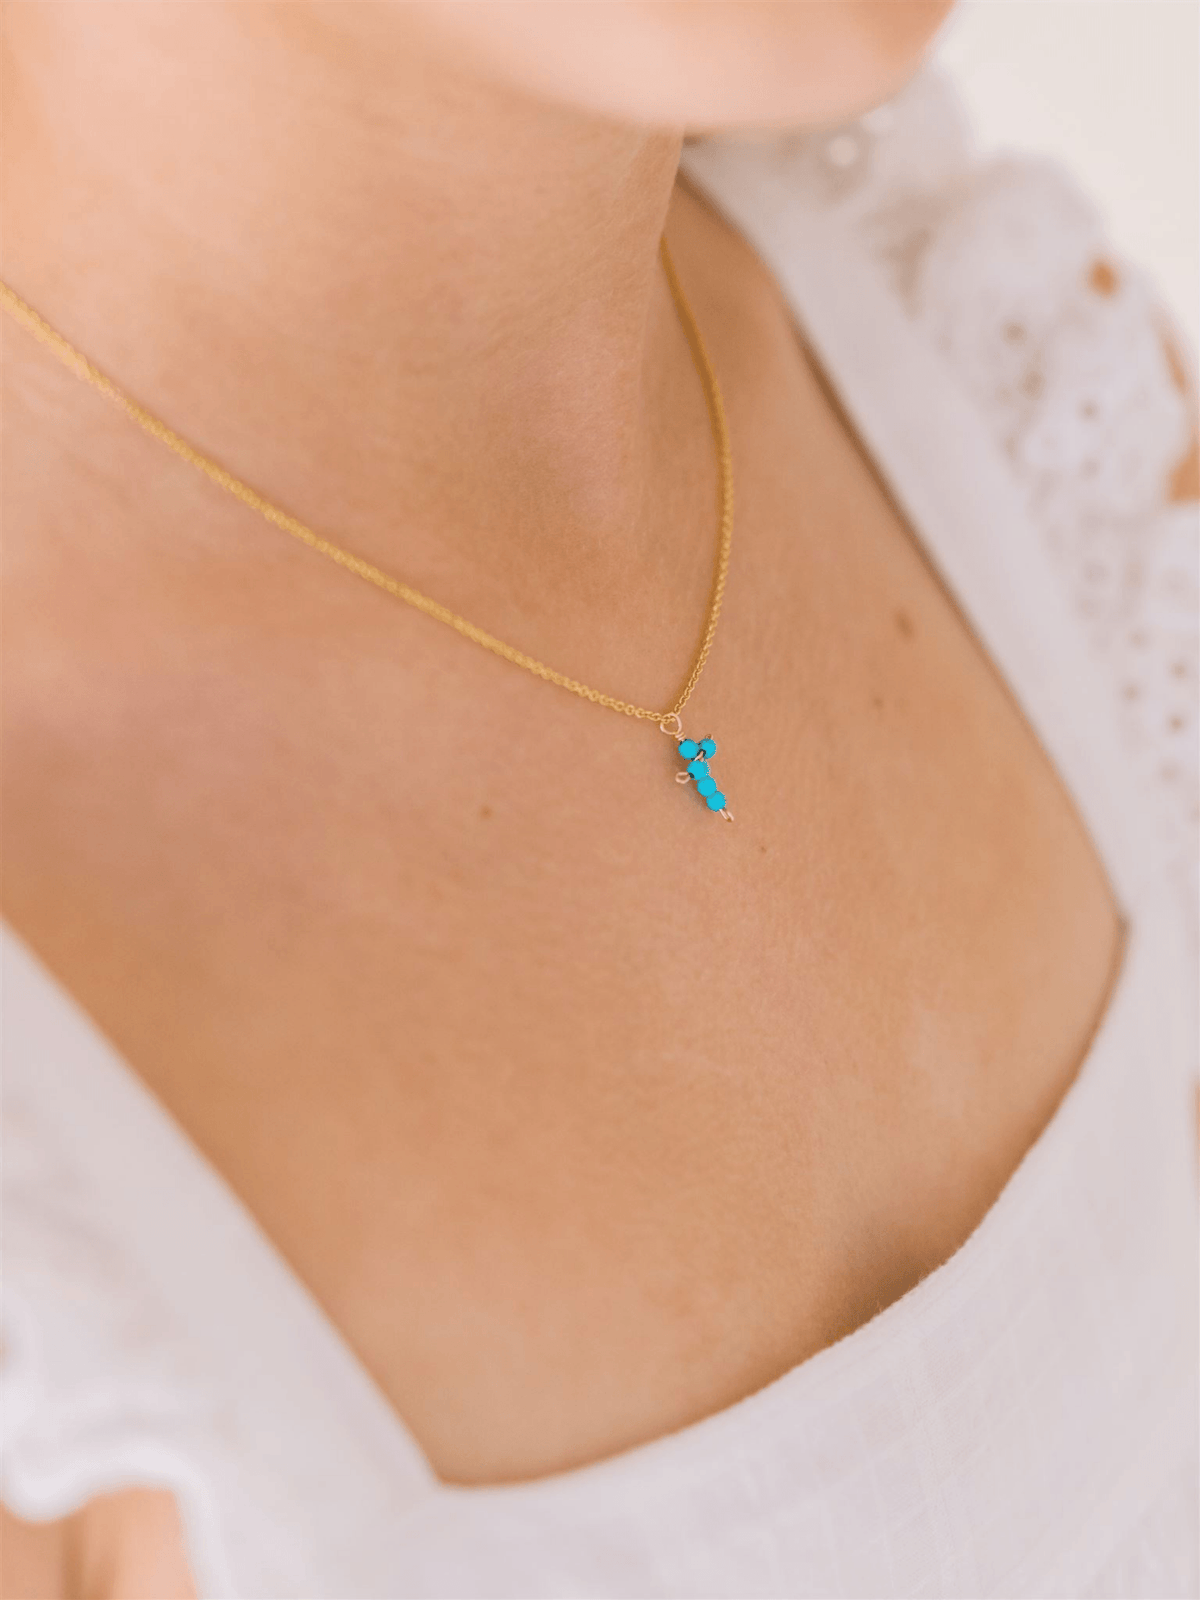 Cross Necklace in Turquoise - LeMel